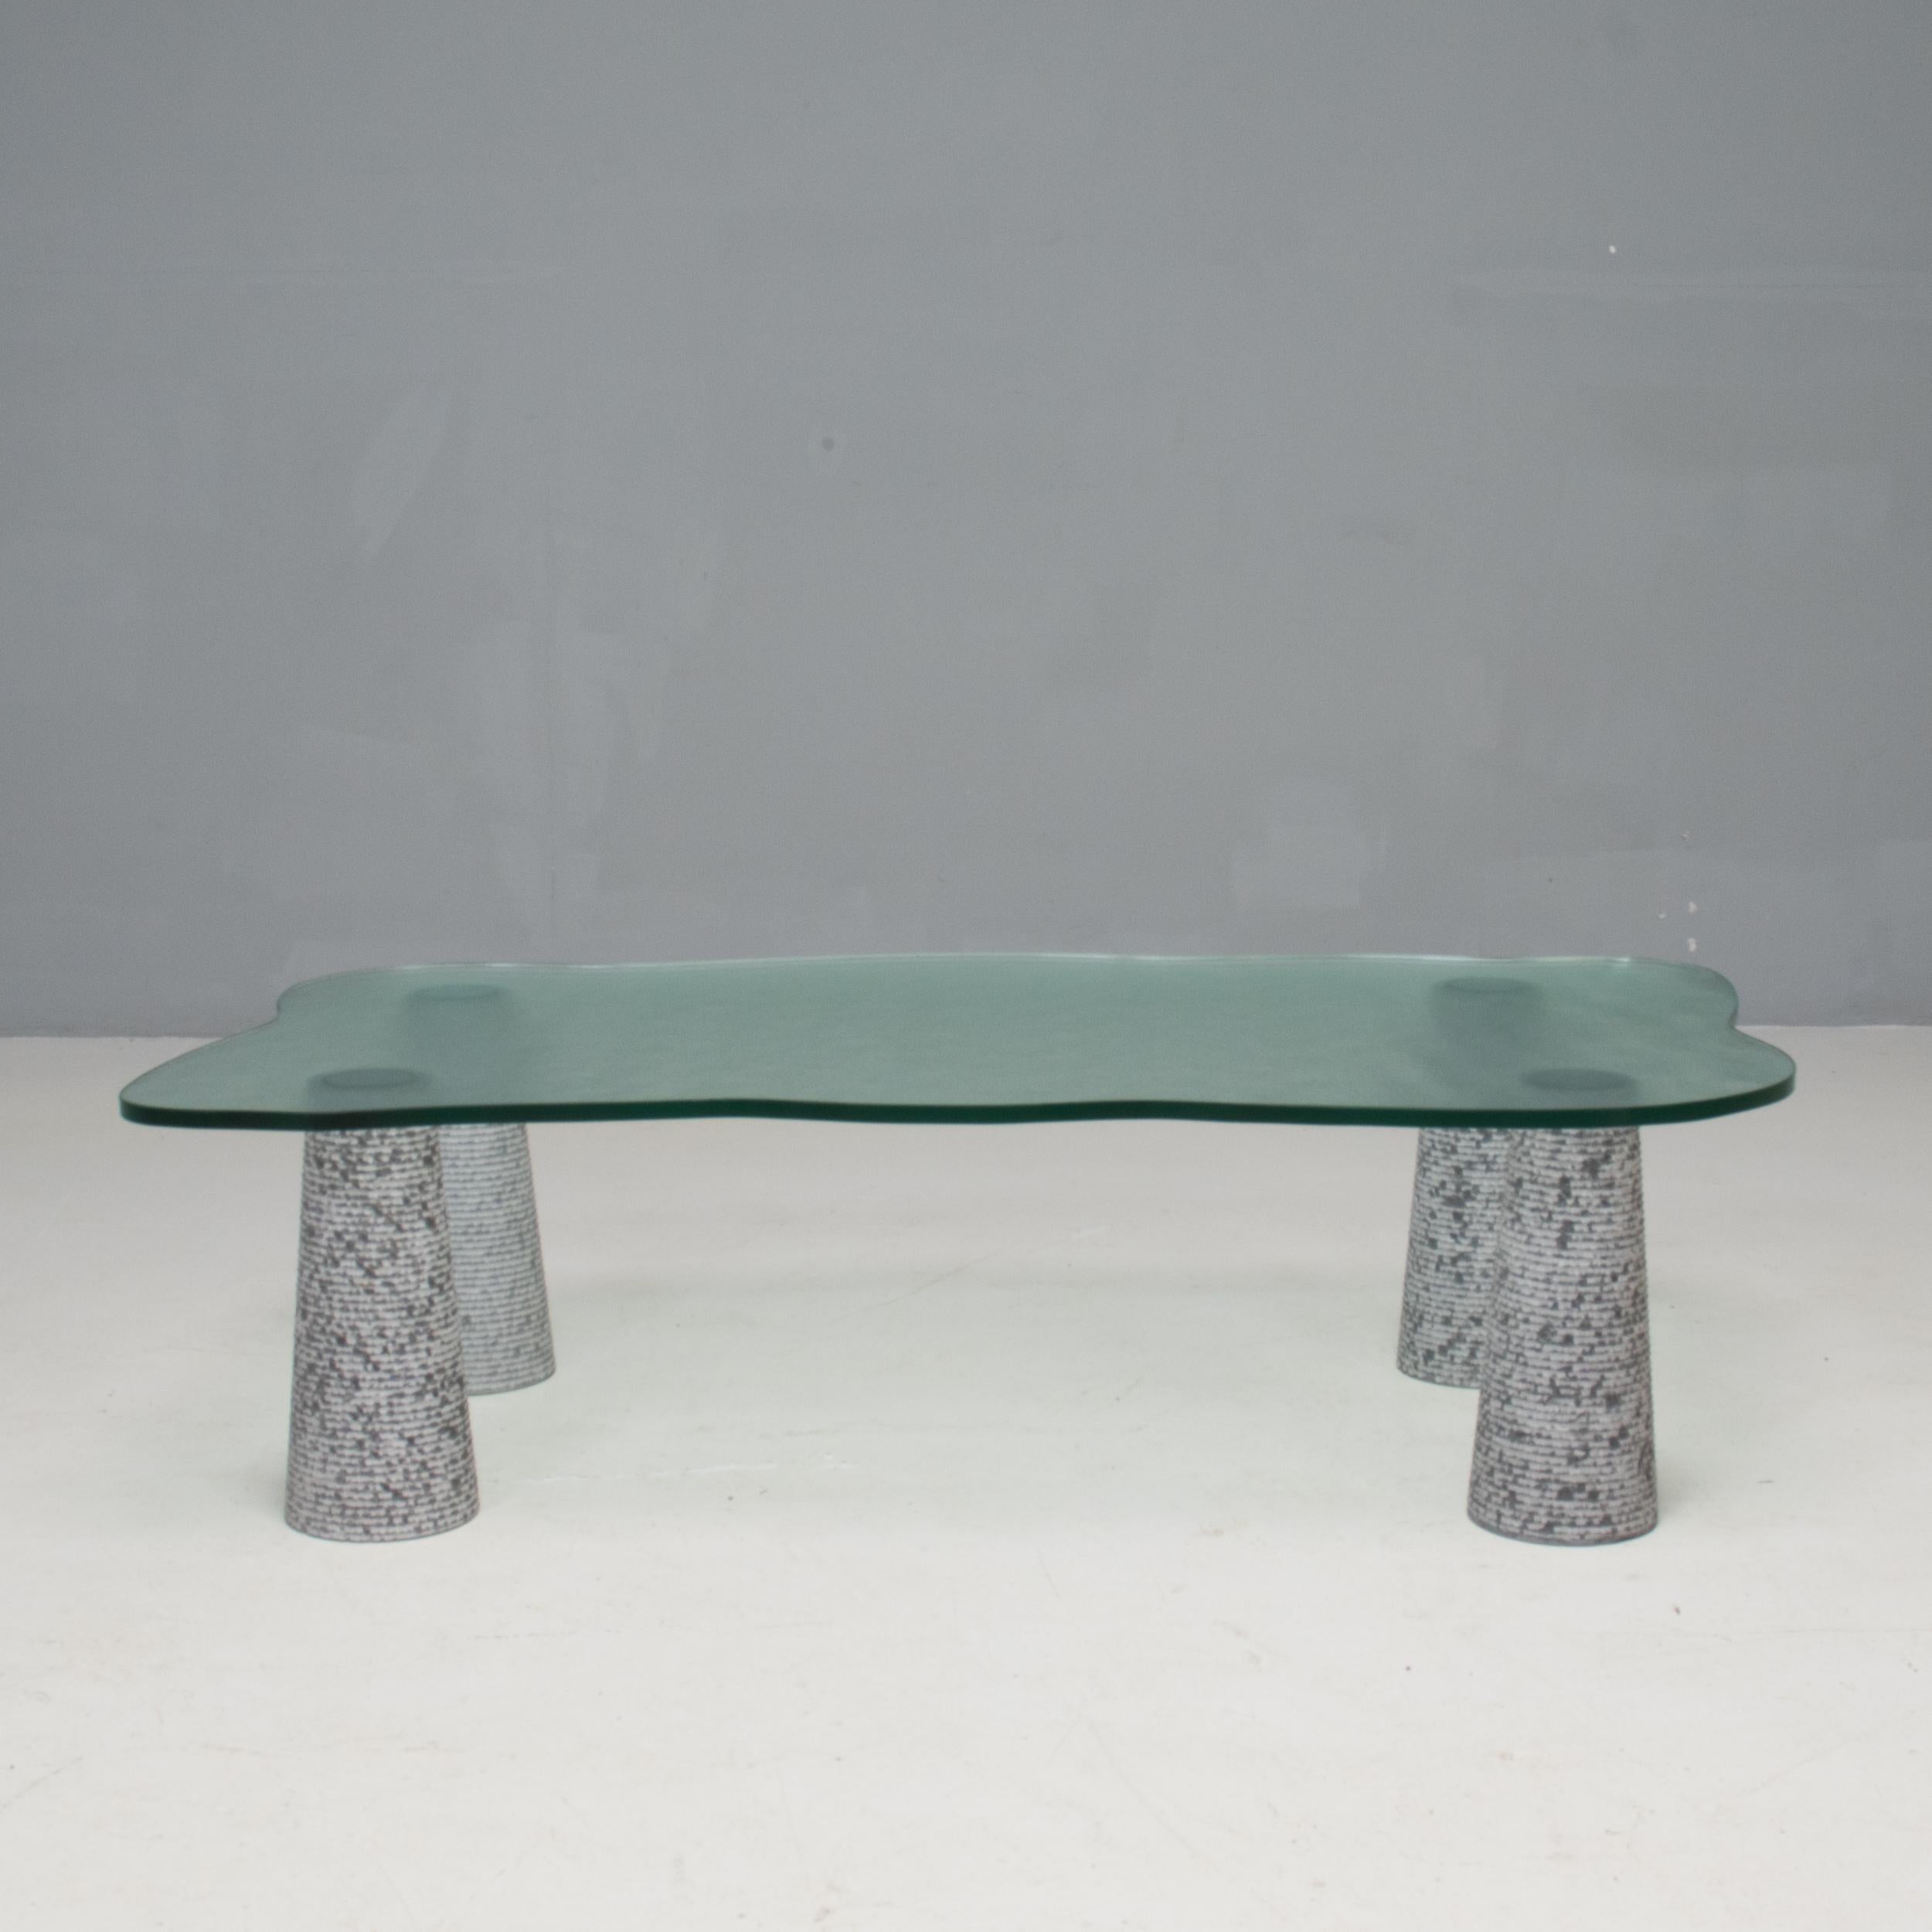 Brutalist Italian Casigliani Grey Marble & Textured Glass Coffee Table, 1980s In Good Condition For Sale In London, GB